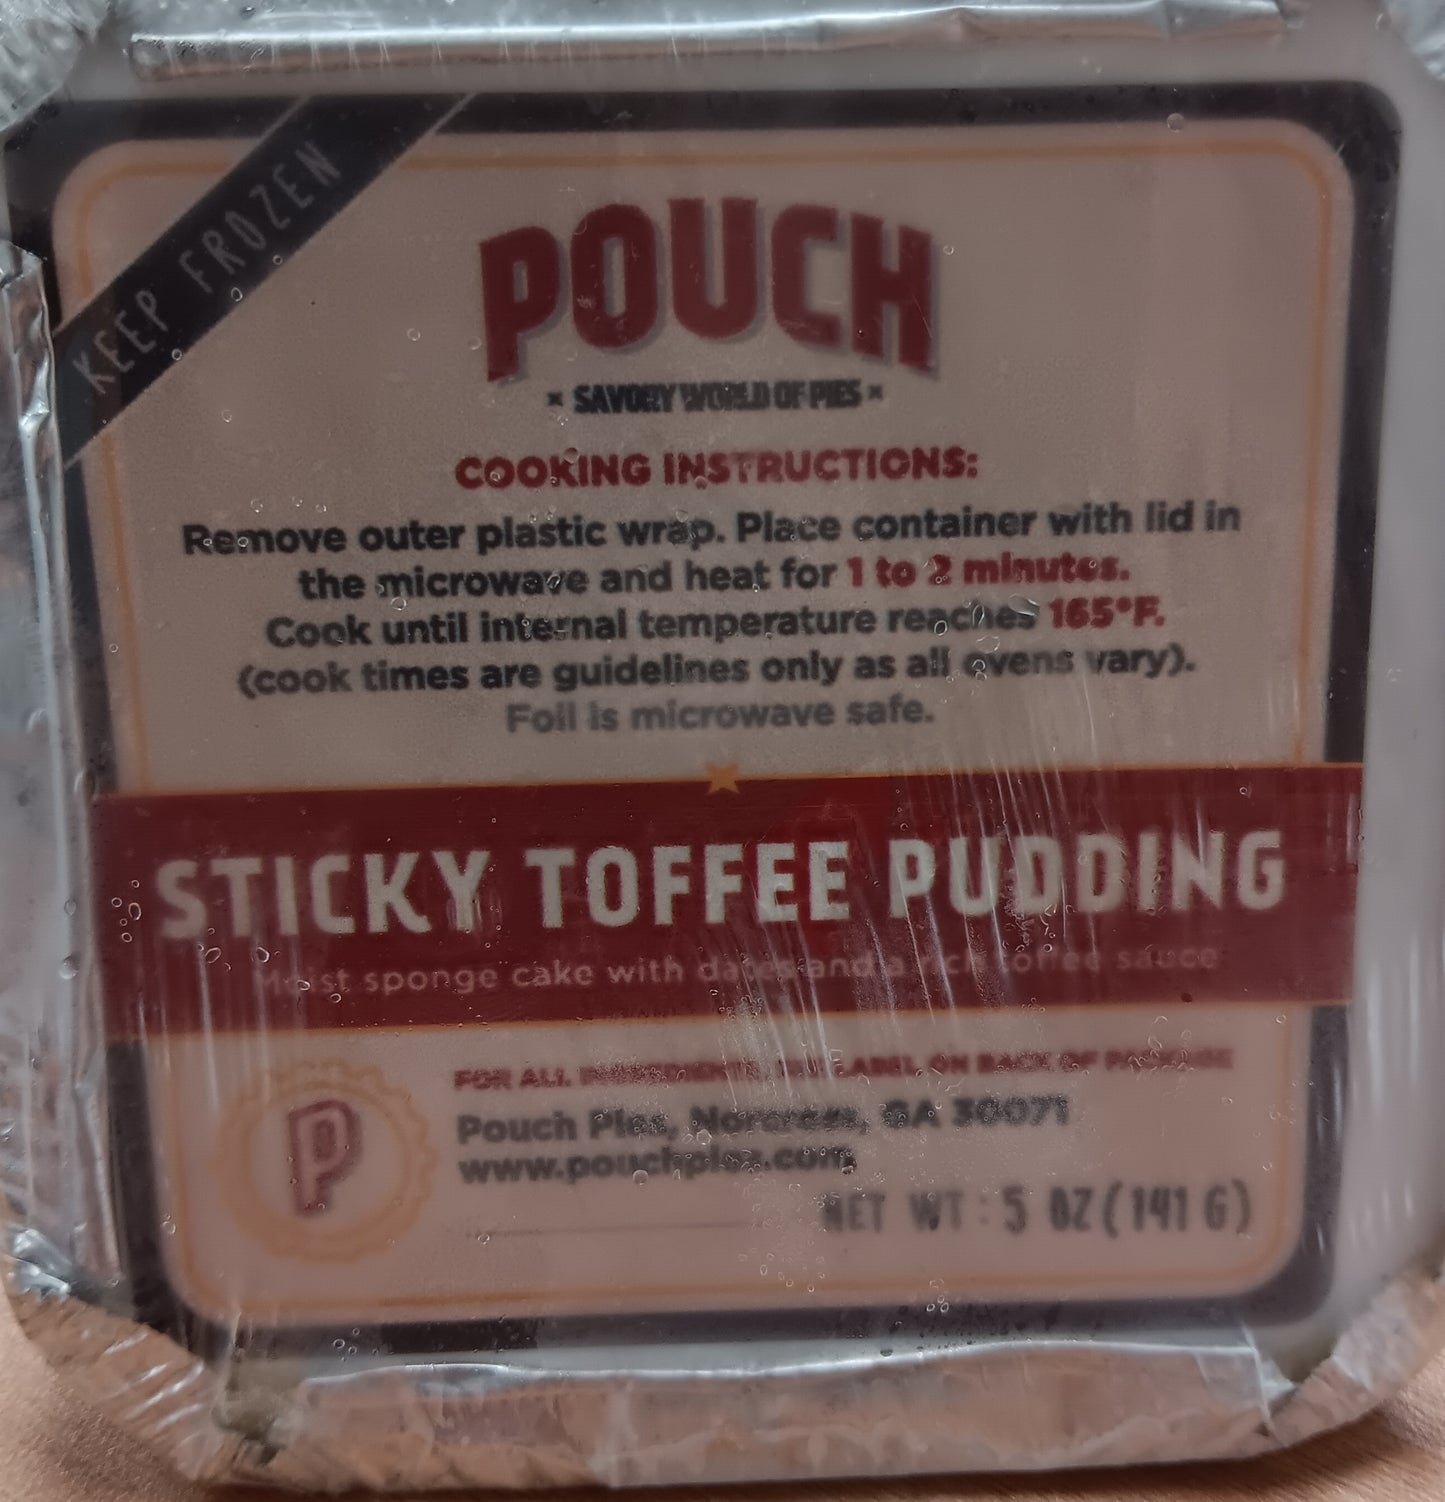 Pouch Pies: Sticky Toffee Pudding